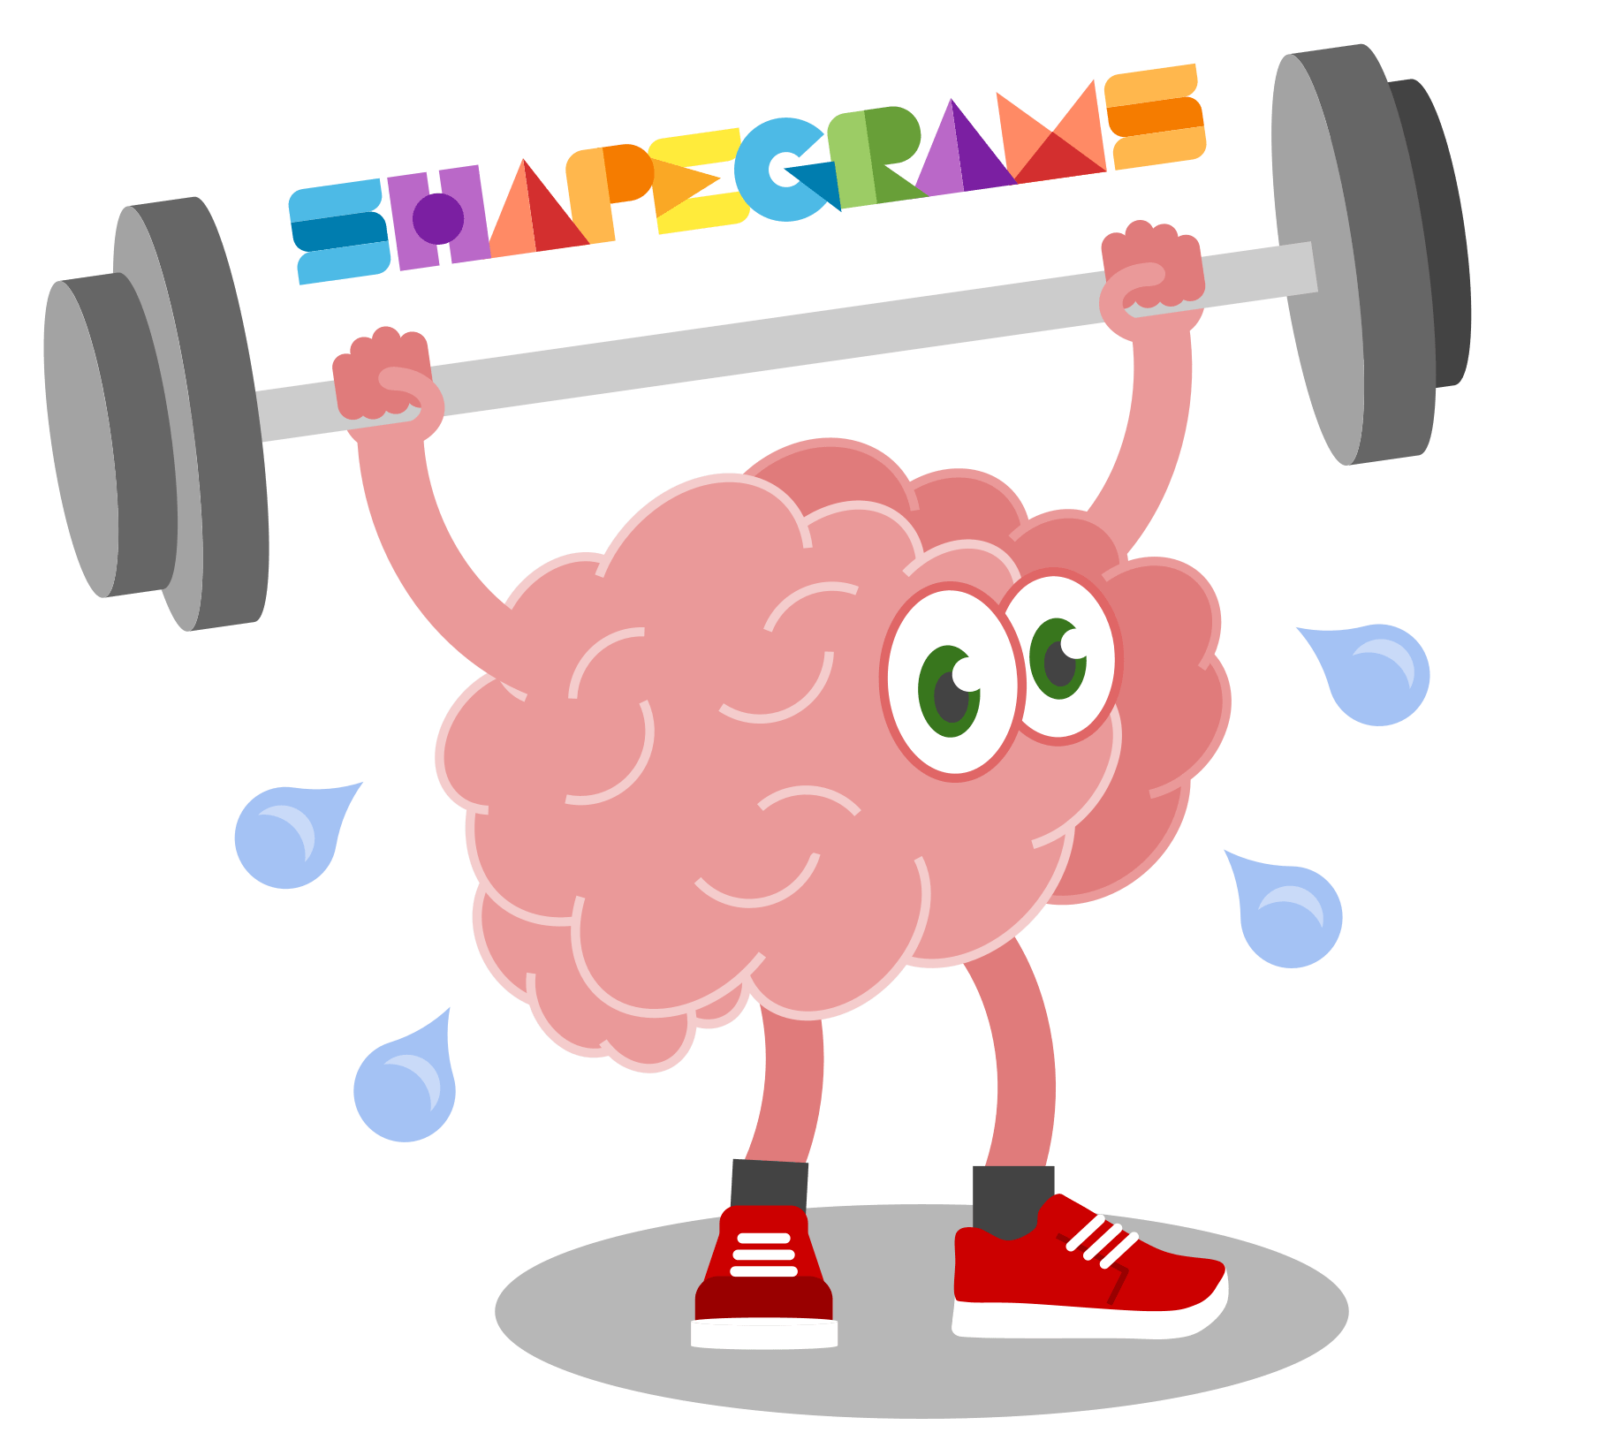 Drawing of a brain character lifting a barbell and sweating